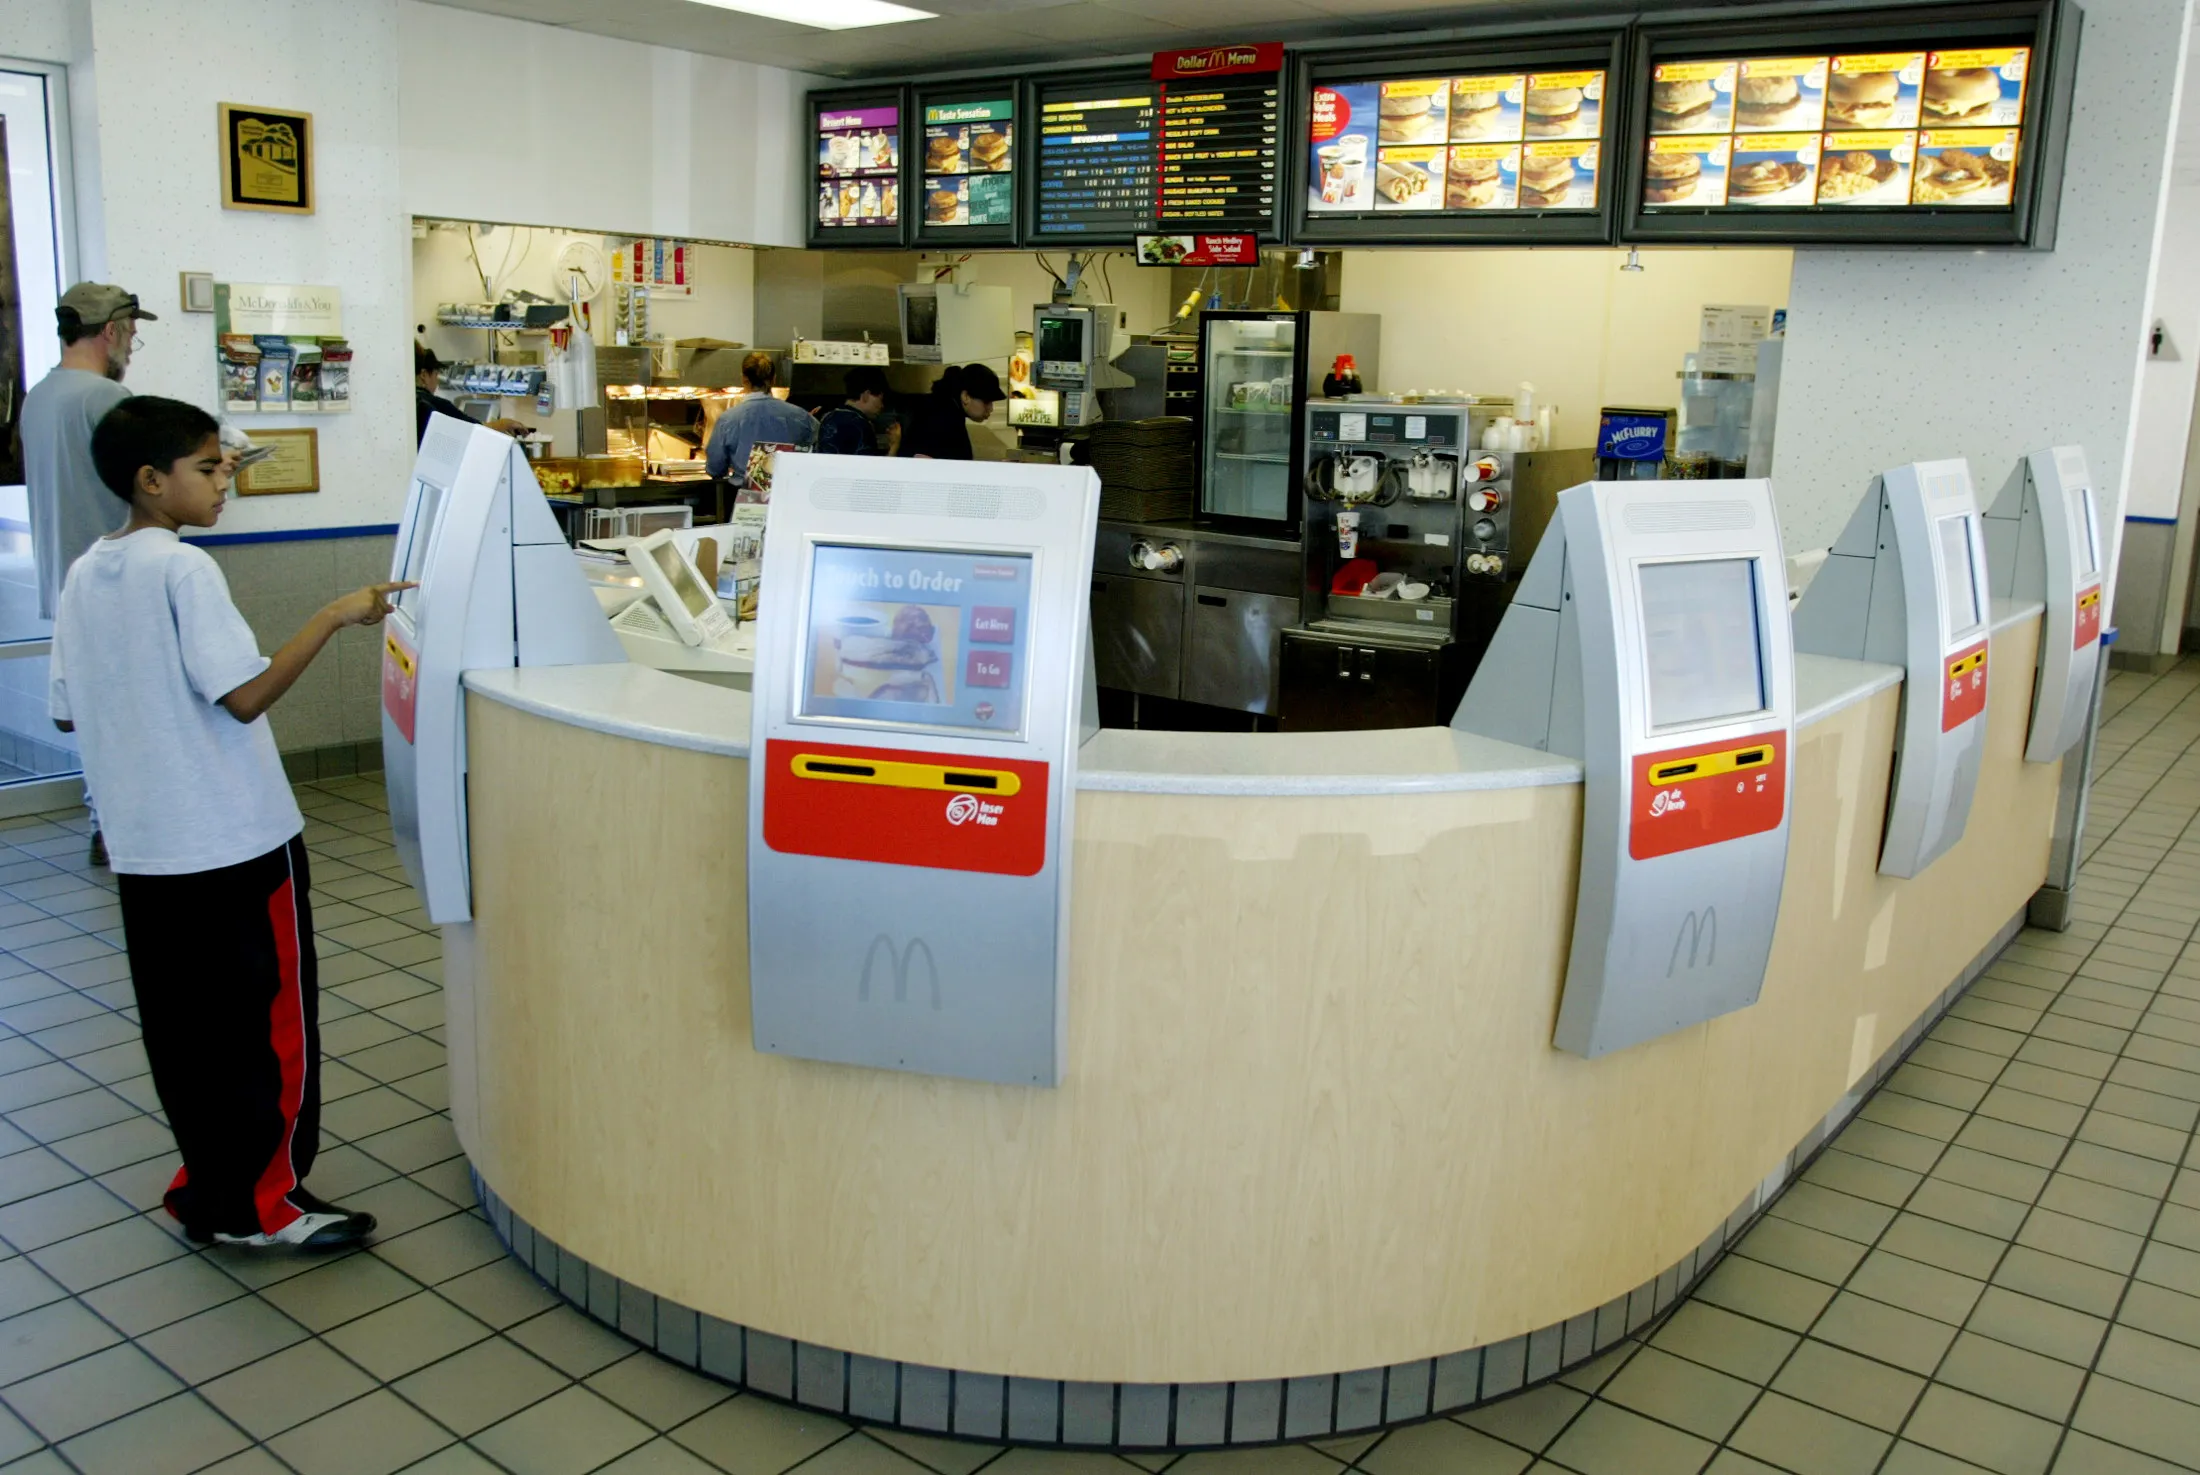 California's Minimum Wage Increase A Tipping Point for Automation in Fast Food Industry